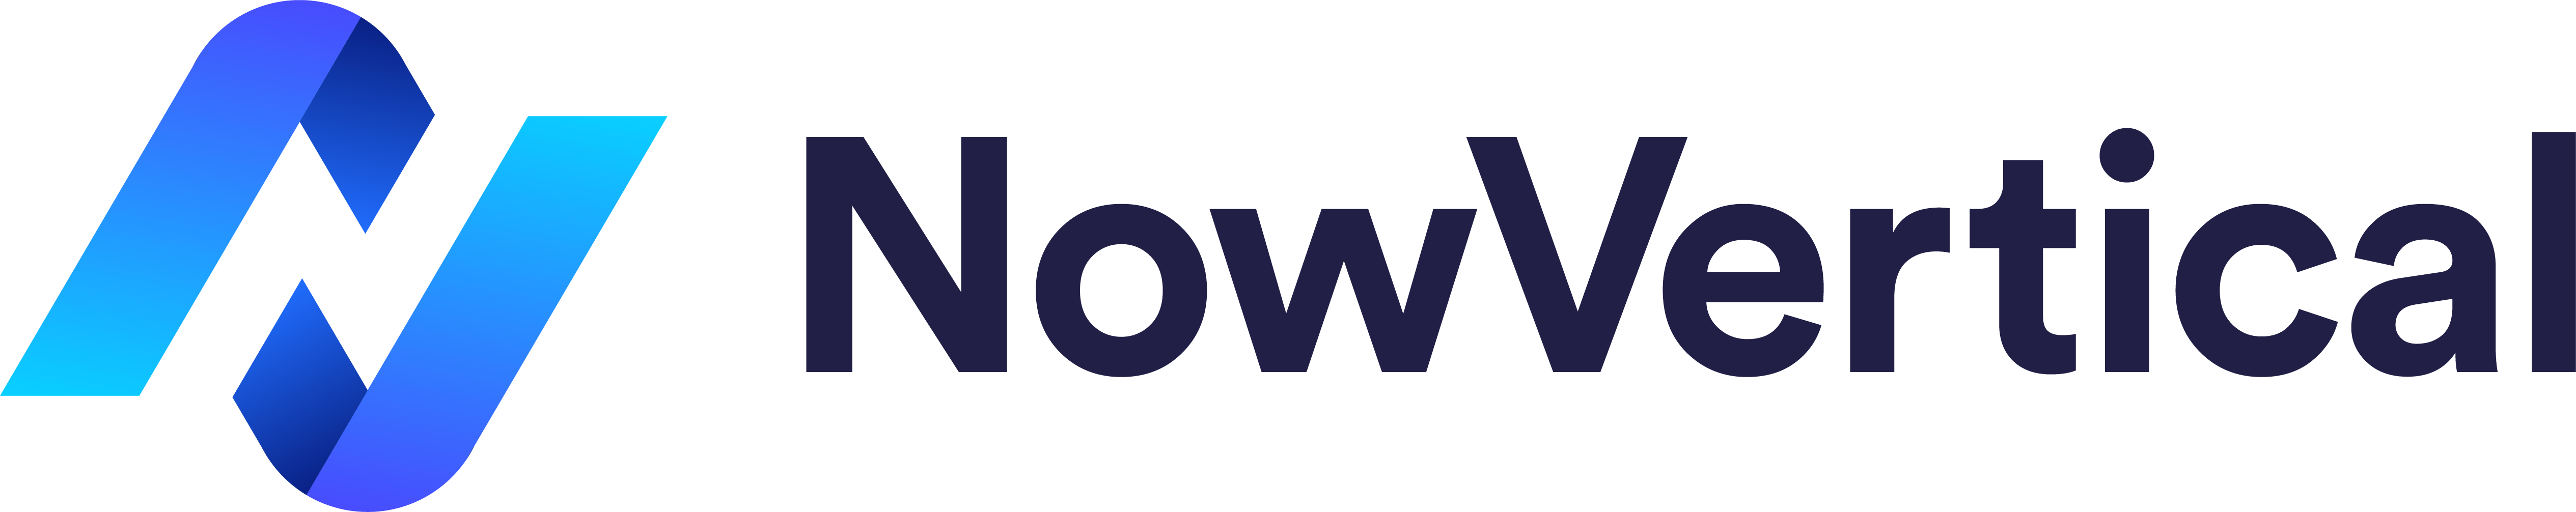 NowVertical Group Announces Strong NOW Affinio SaaS Contract Renewals and Customer Expansions